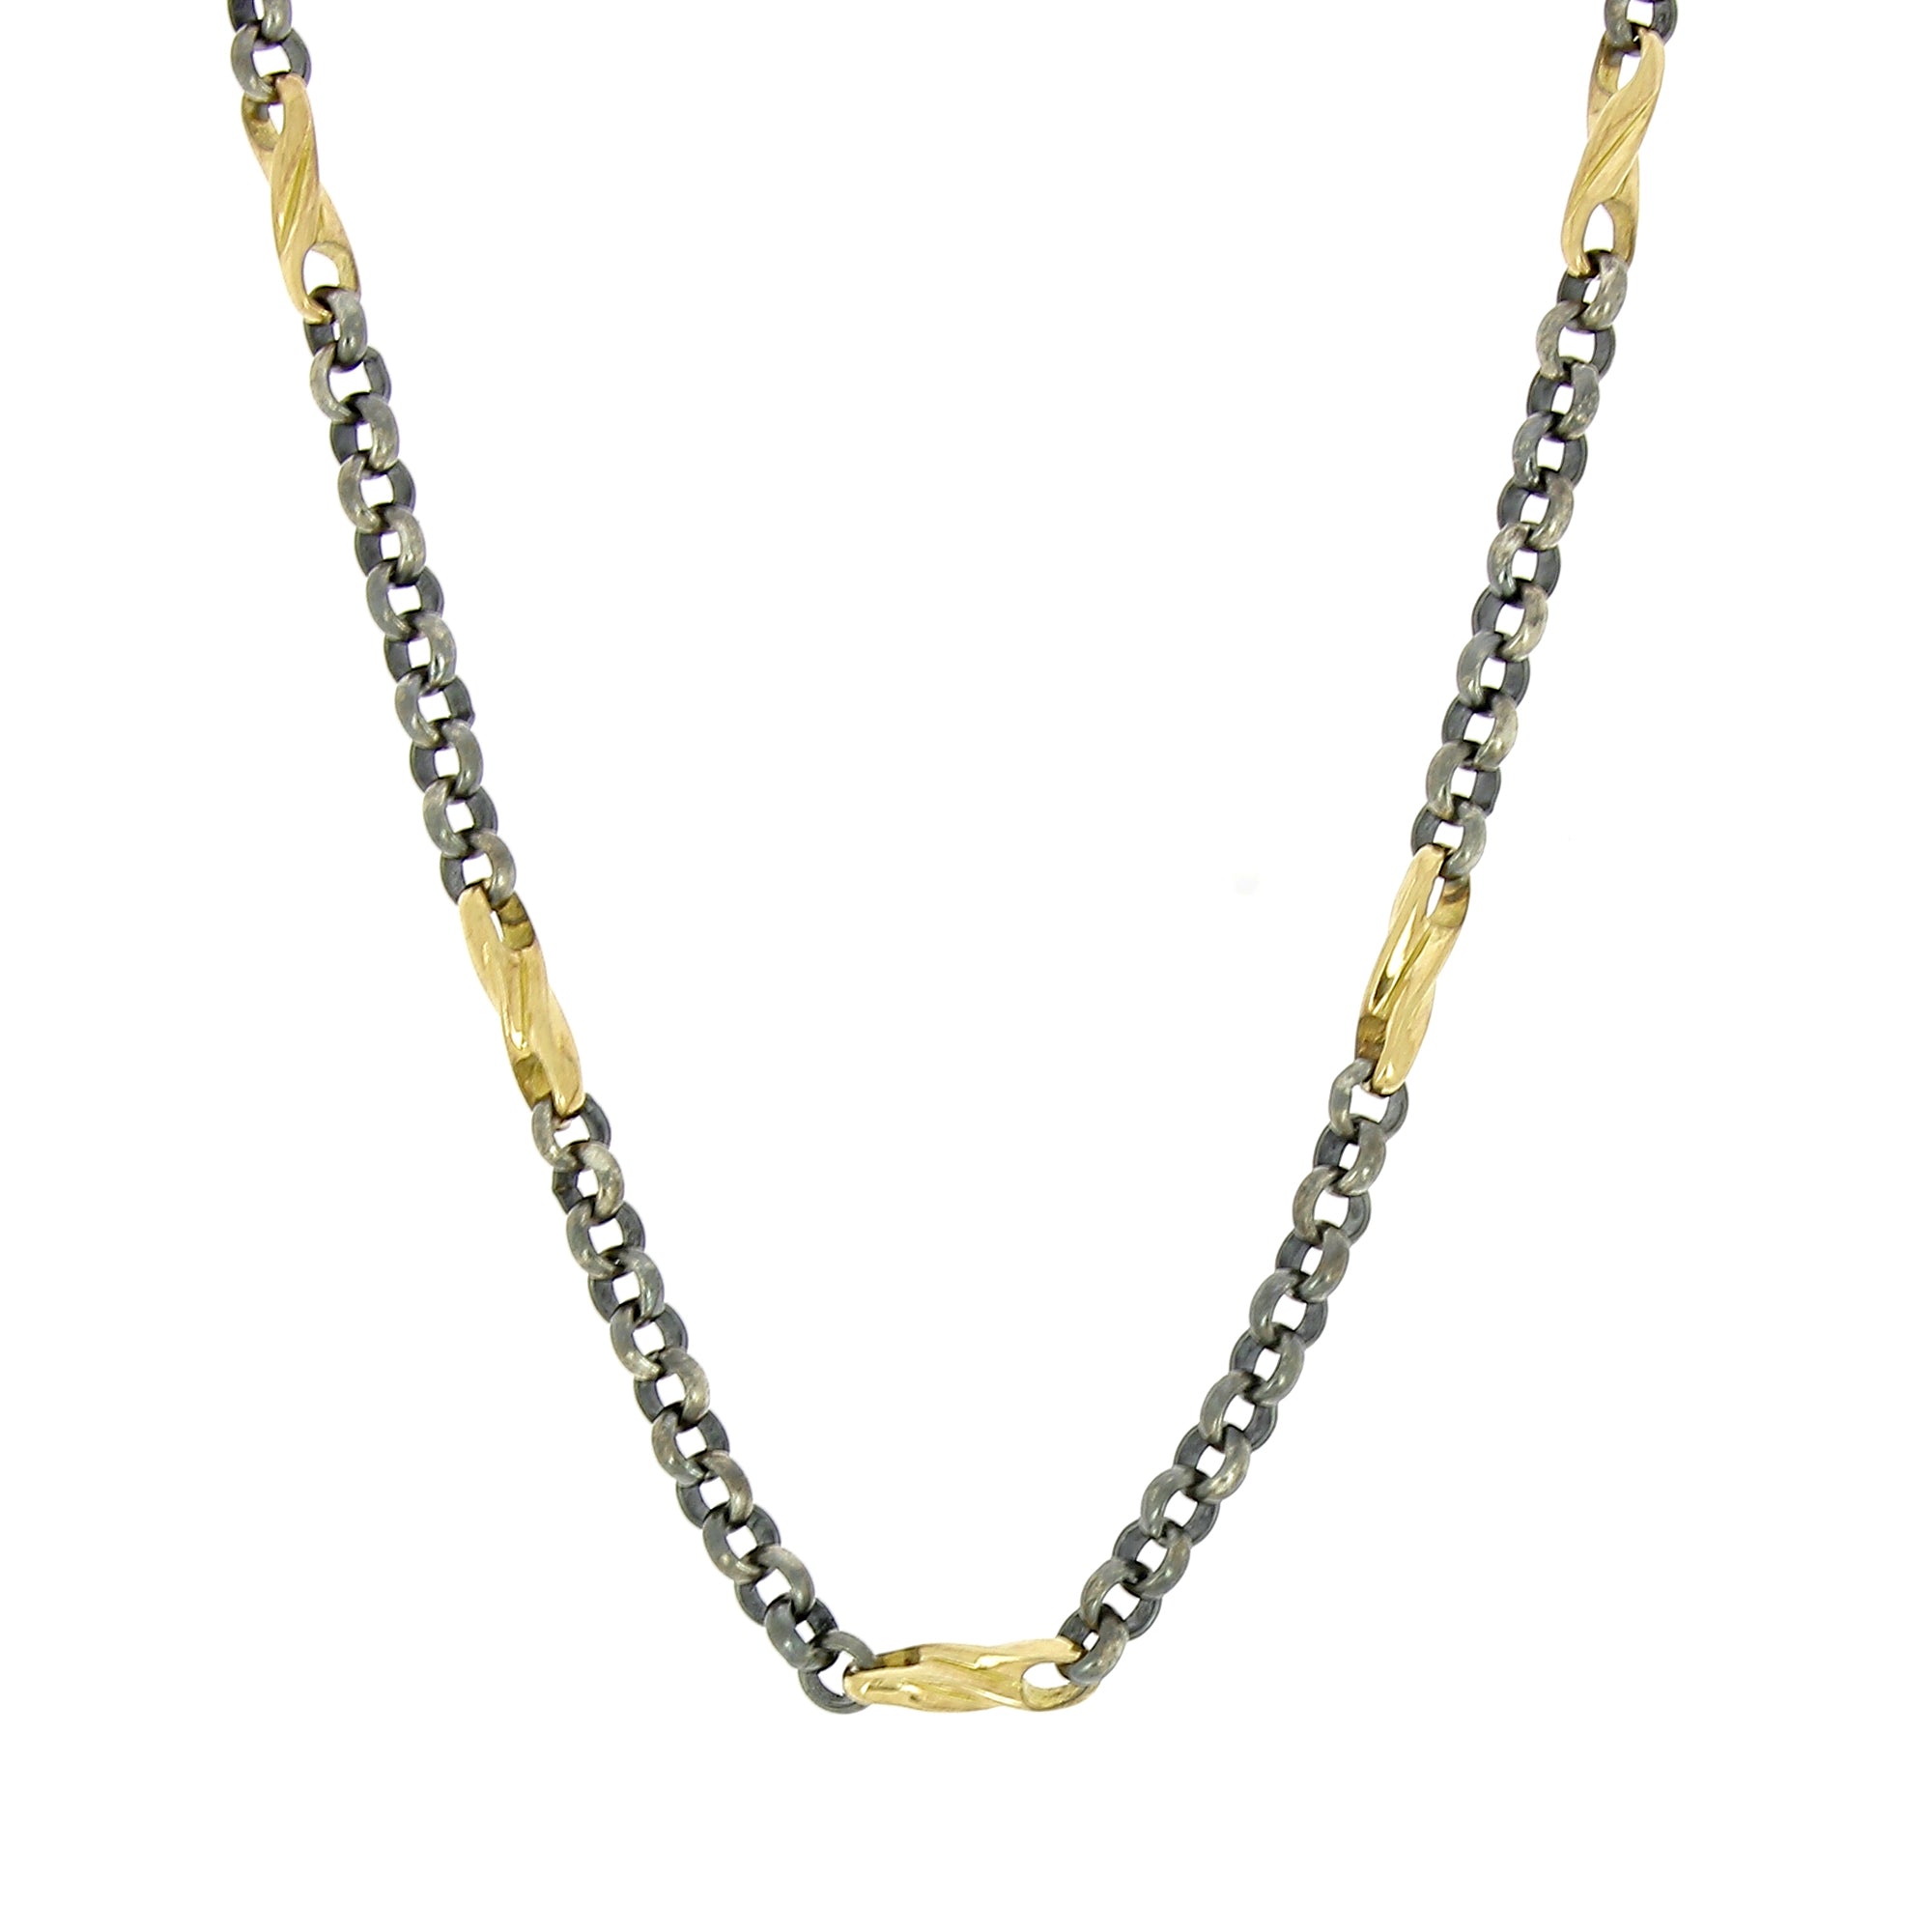 Silver and Yellow Gold Belcher Necklace